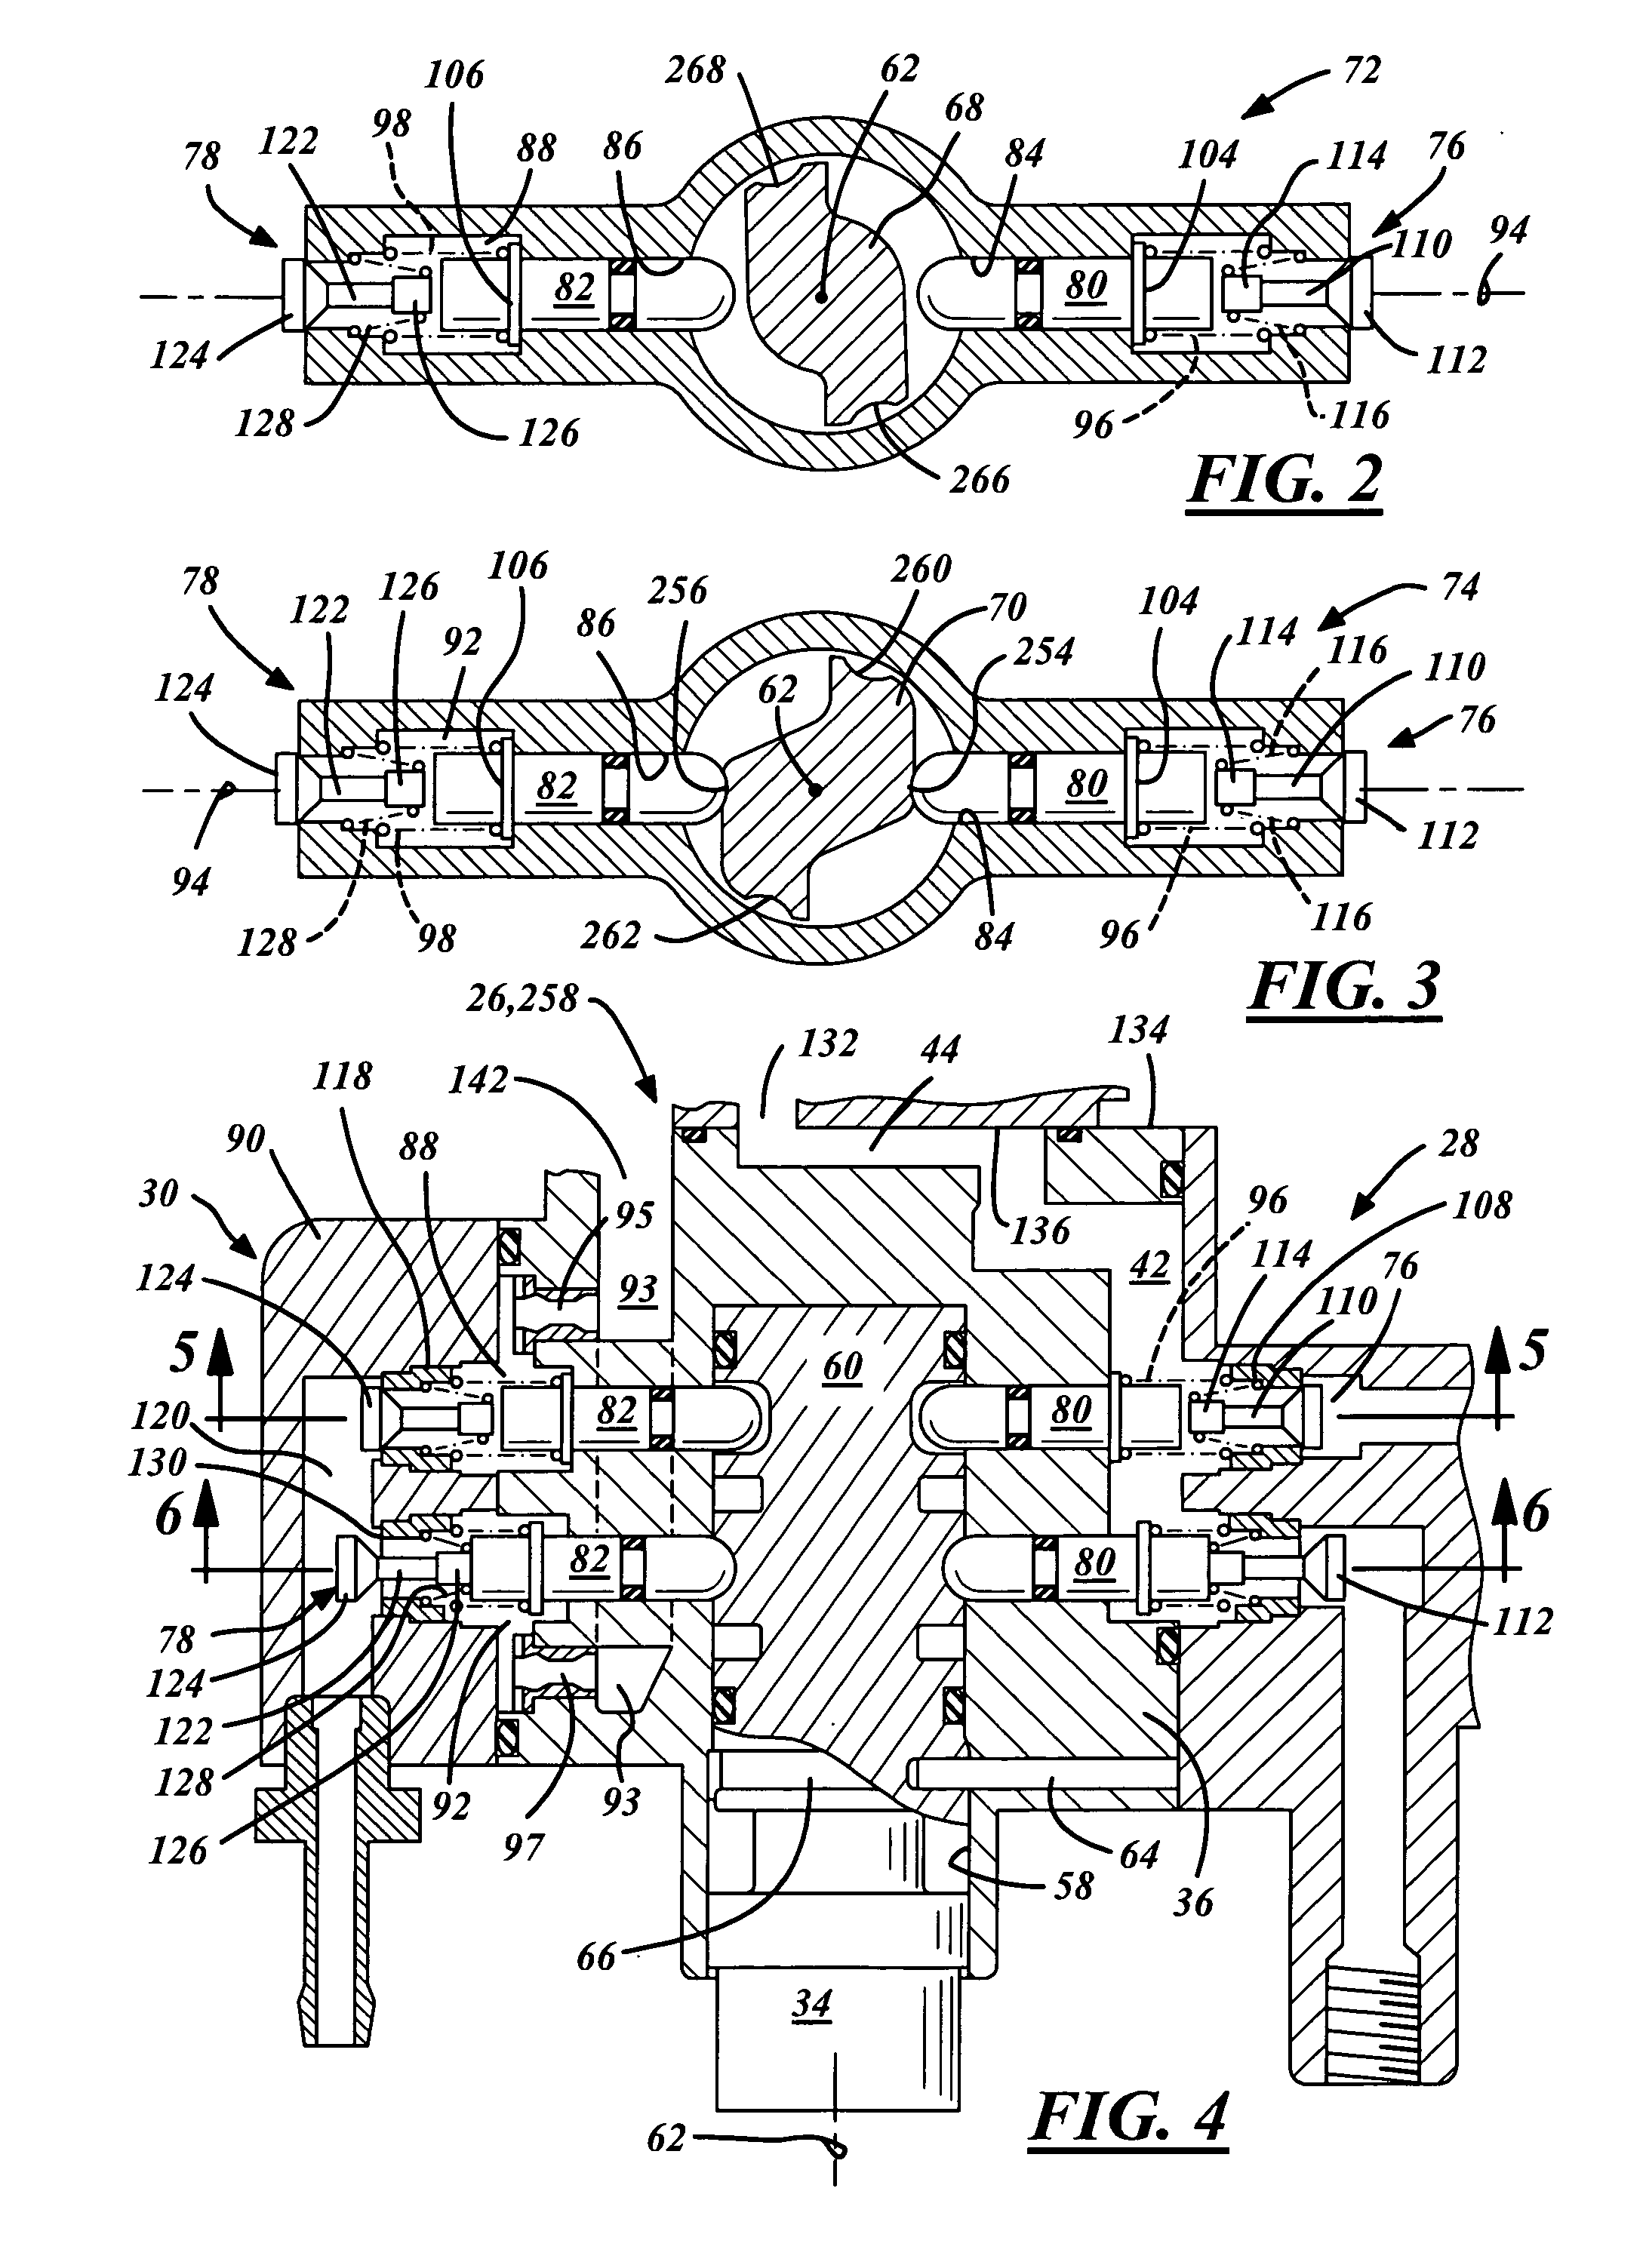 Fuel control device for a combustion engine